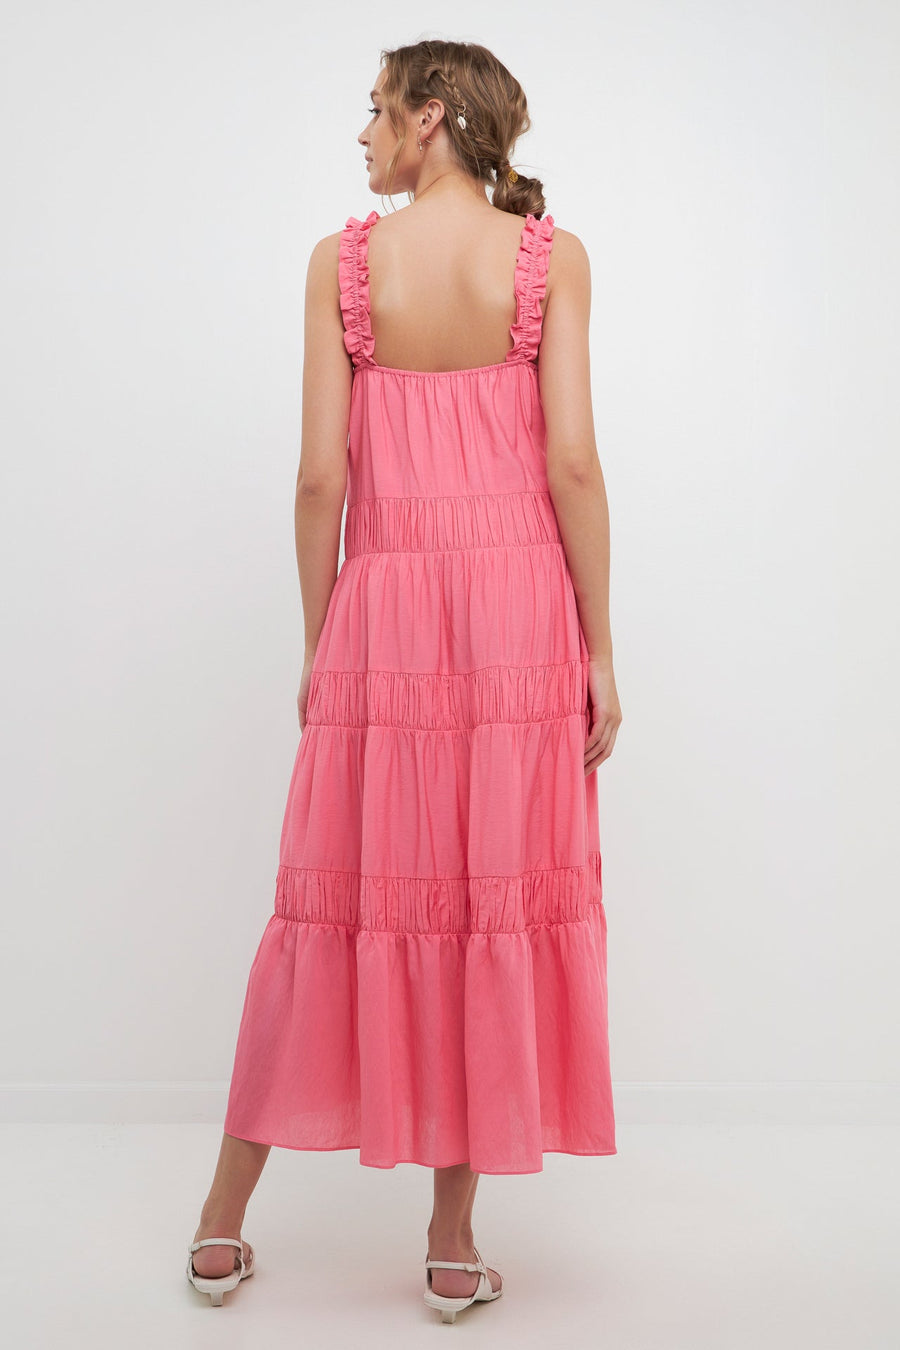 FREE THE ROSES-Ruched Layered Sweetheart Maxi Dress-DRESSES available at Objectrare